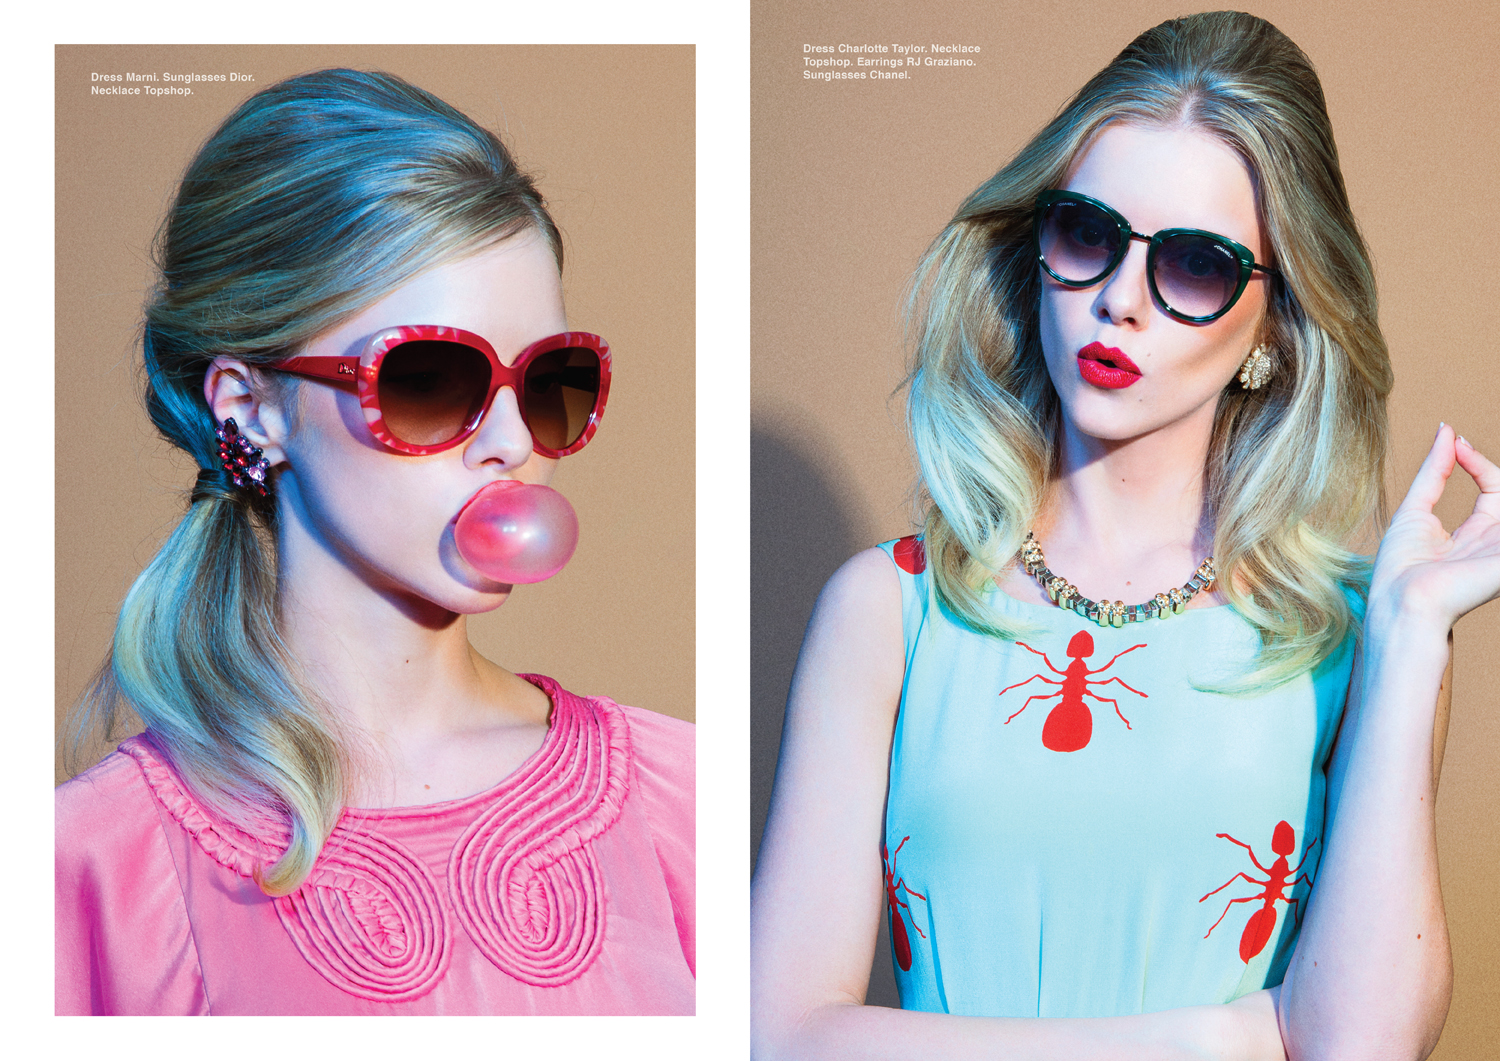 Left page, dress Marni. Sunglasses Christian Dior. Necklace Topshop. Right page, dress Charlotte Taylor. Necklace Topshop. Earrings RJ Graziano. Sunglasses Chanel.